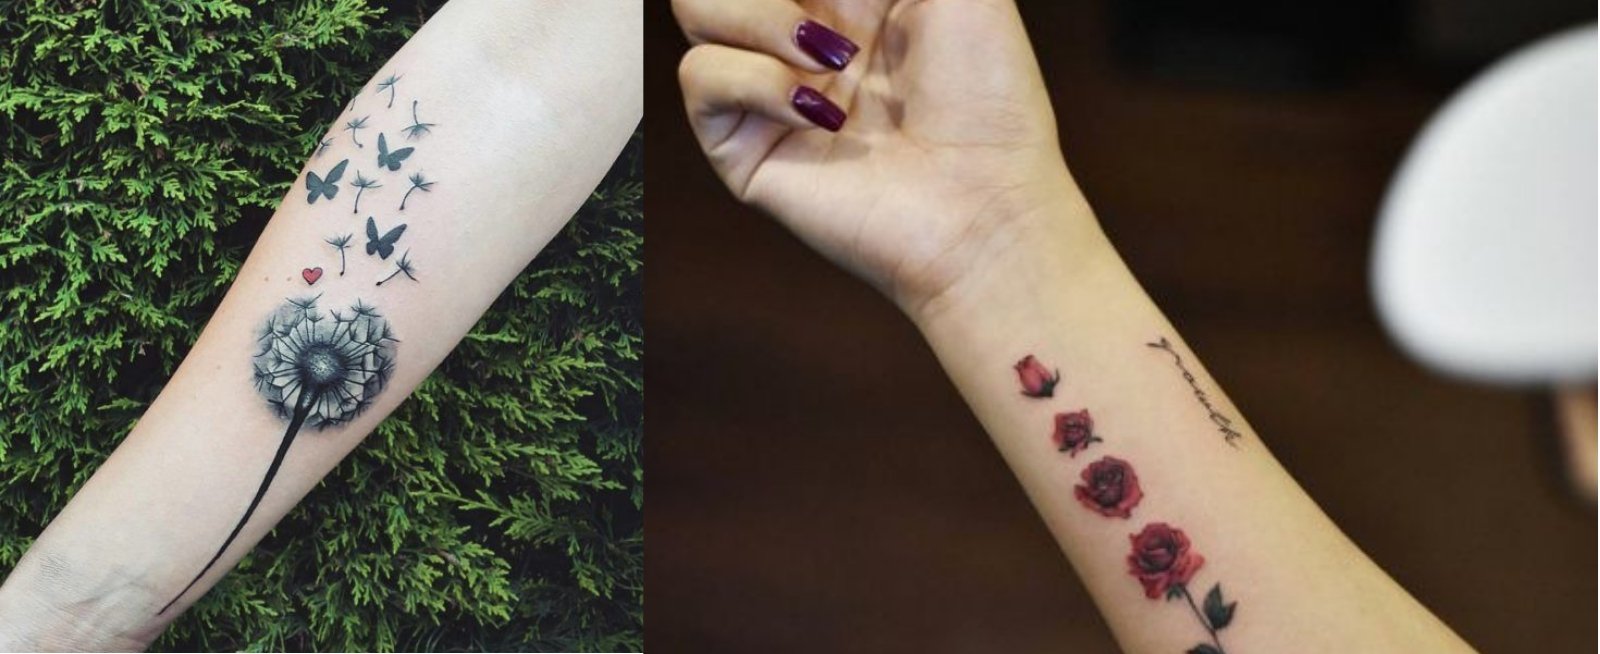 13 Tattoos That Show Your Life Goals Are Growth And Change